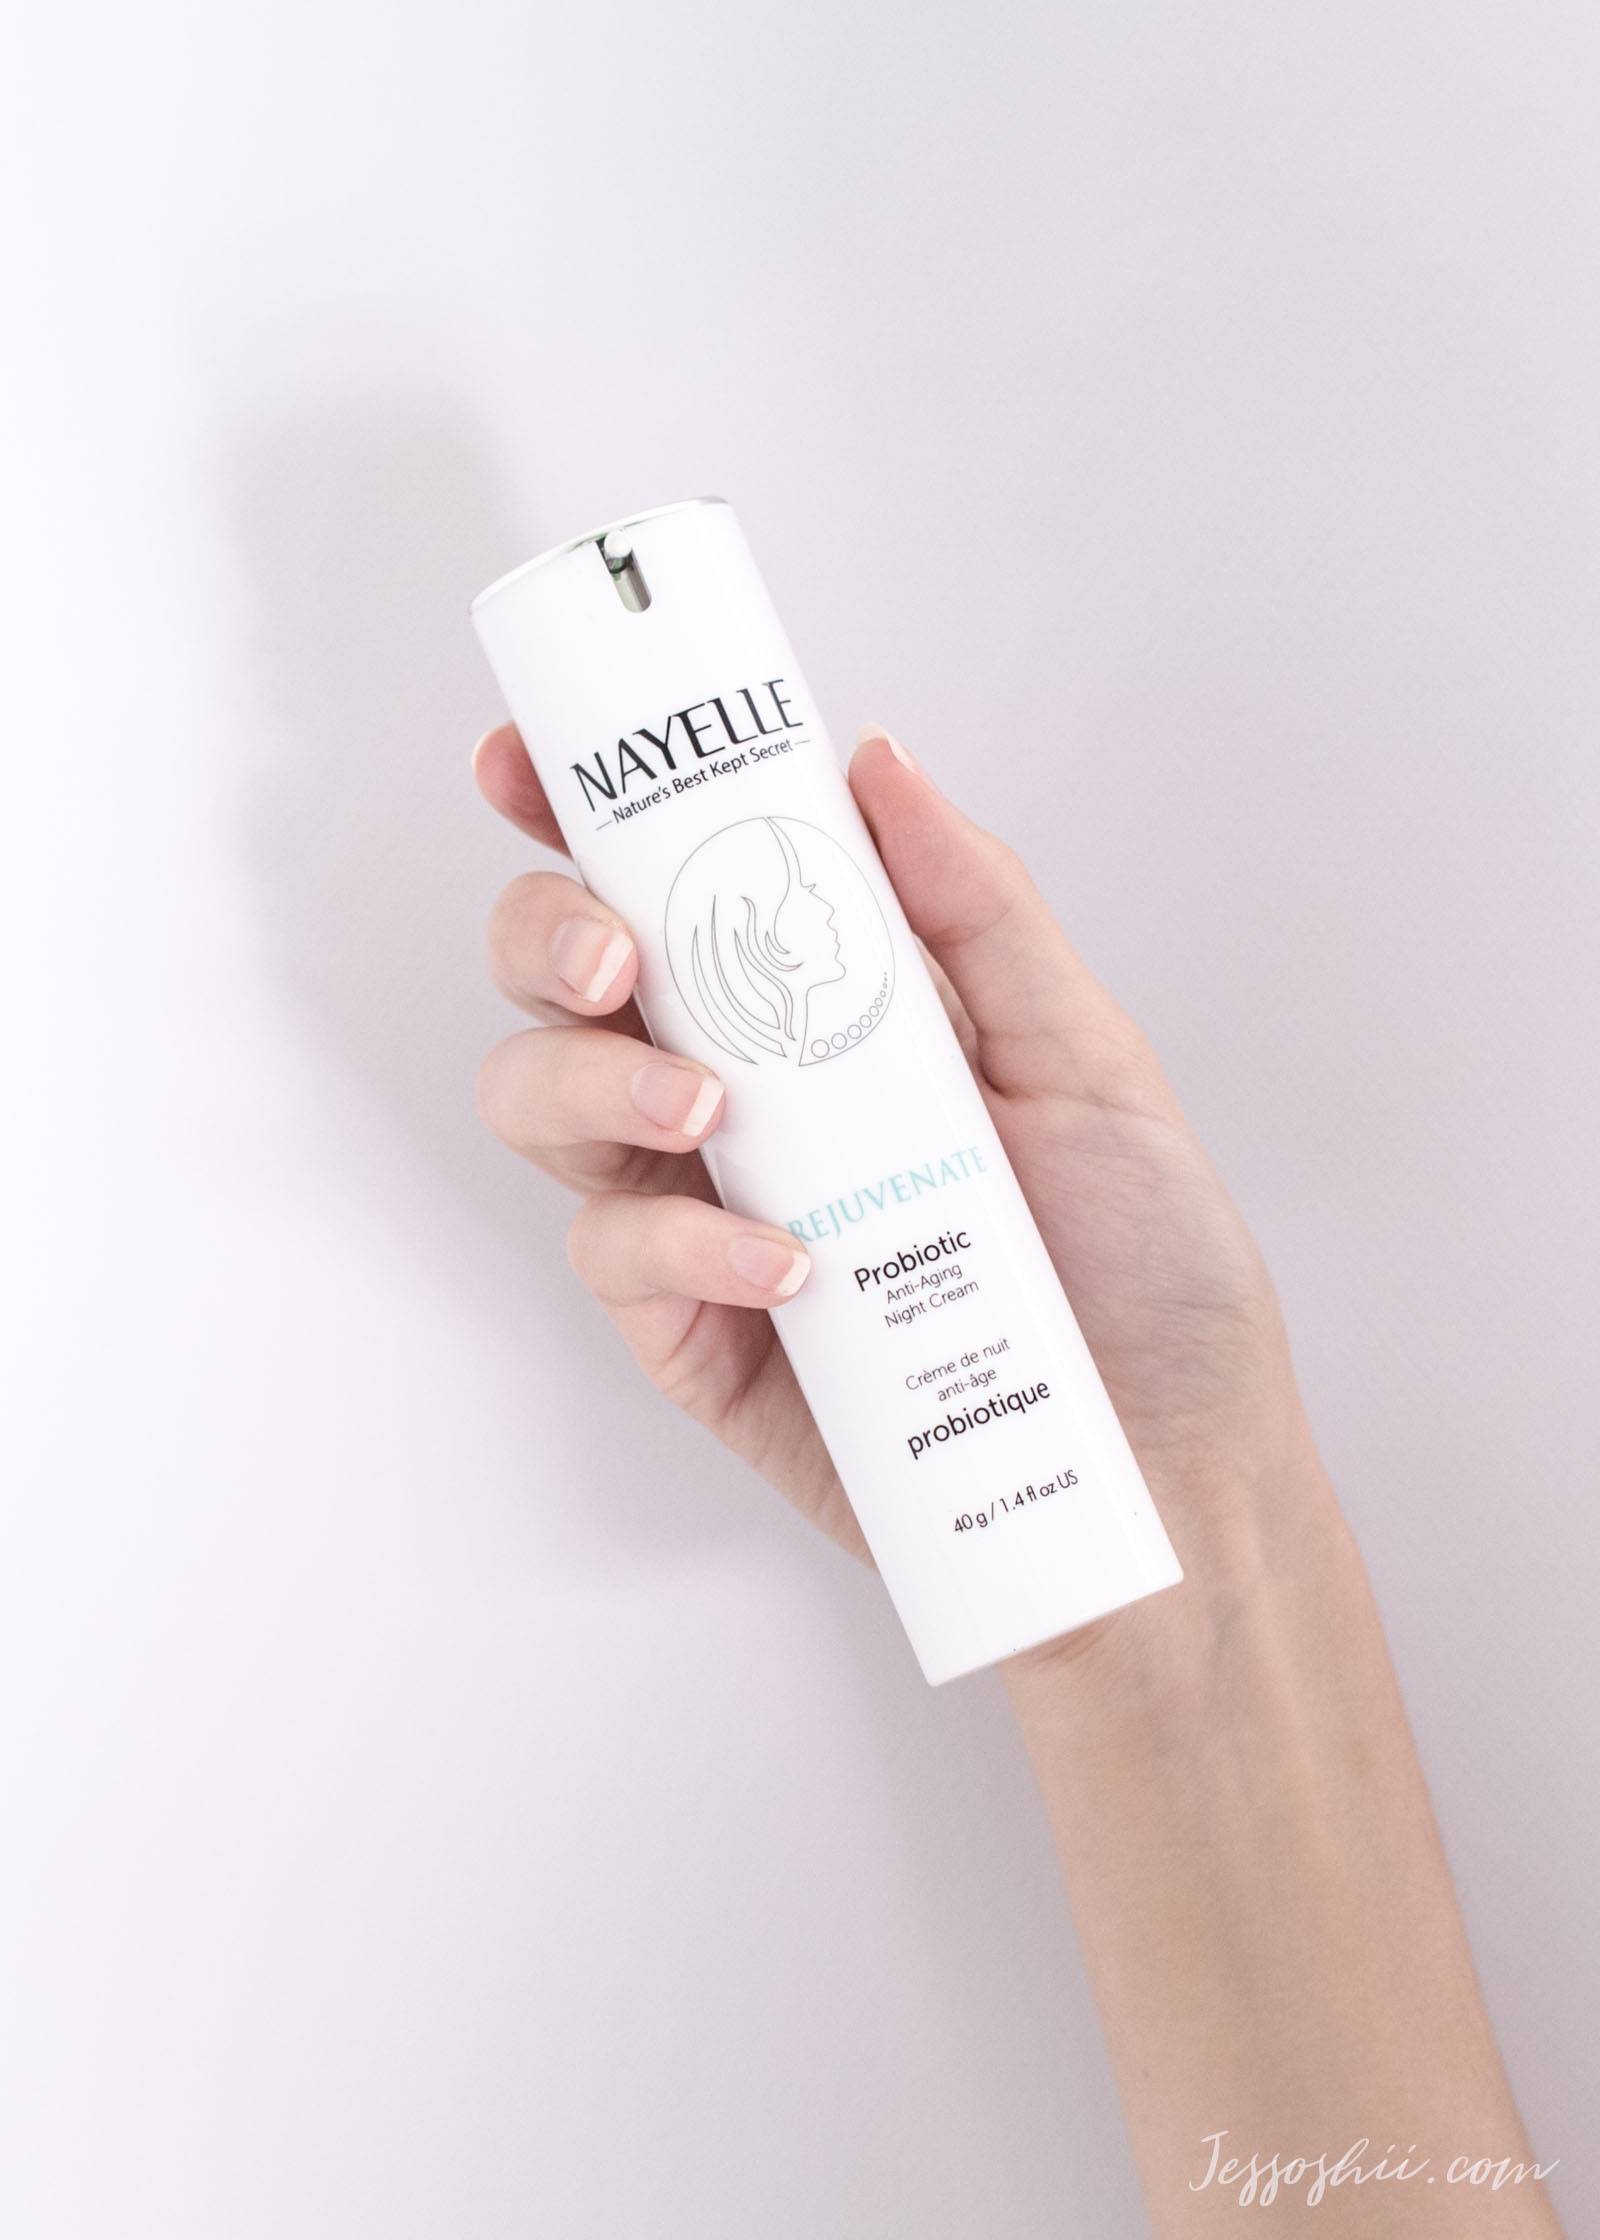 REVIEW: Nayelle Probiotic Skincare | My Results, Before & After - Jessoshii